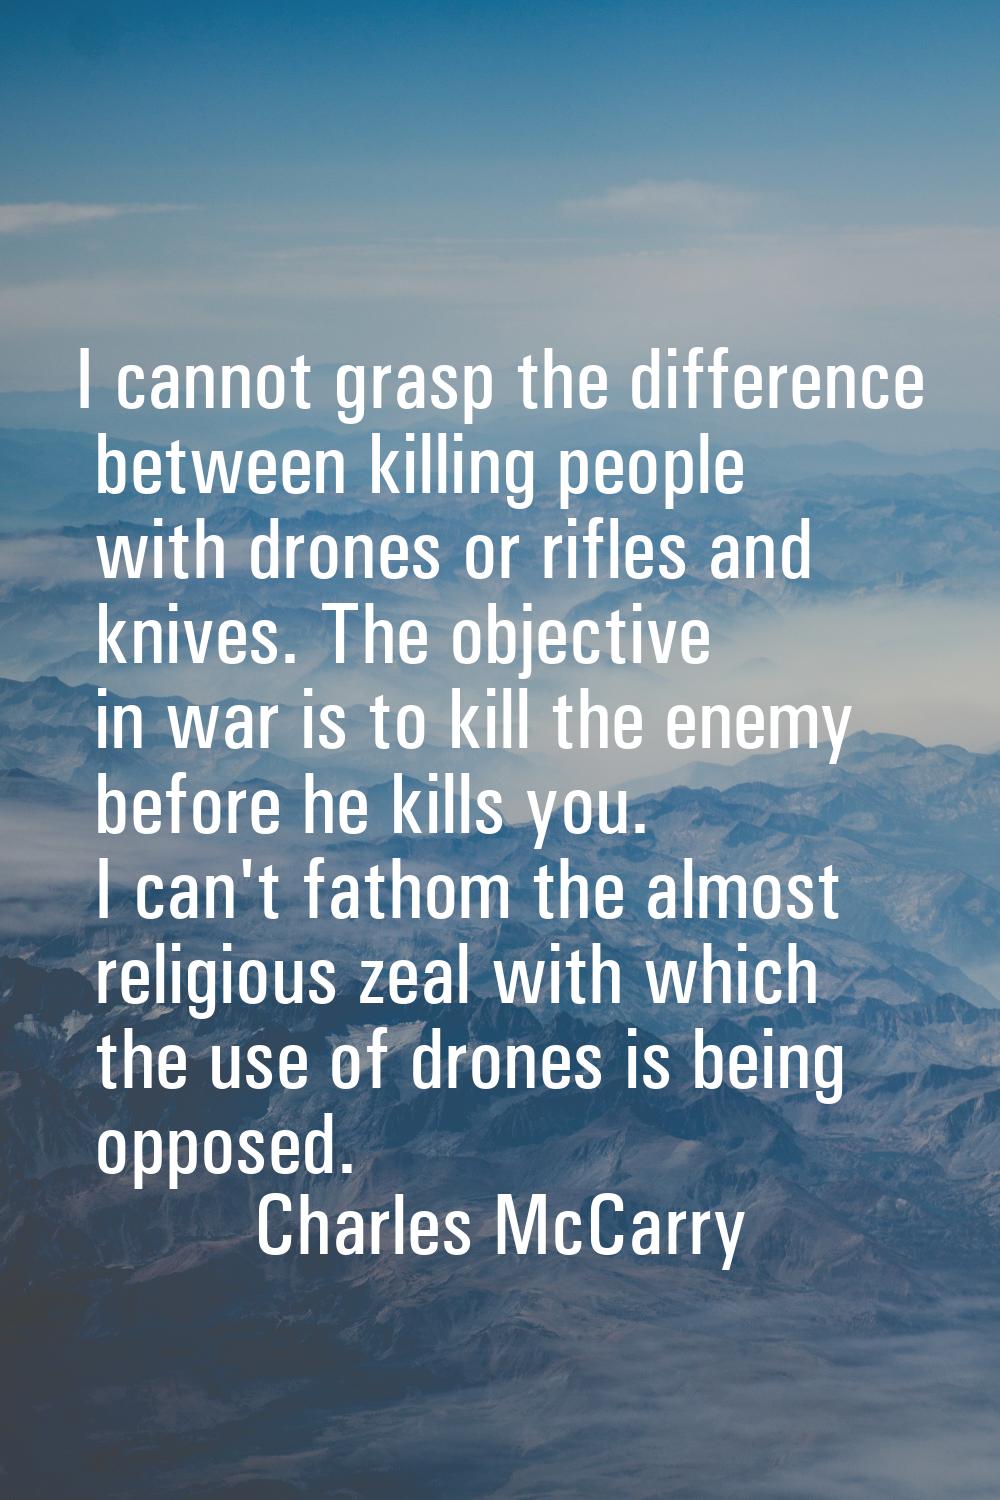 I cannot grasp the difference between killing people with drones or rifles and knives. The objectiv